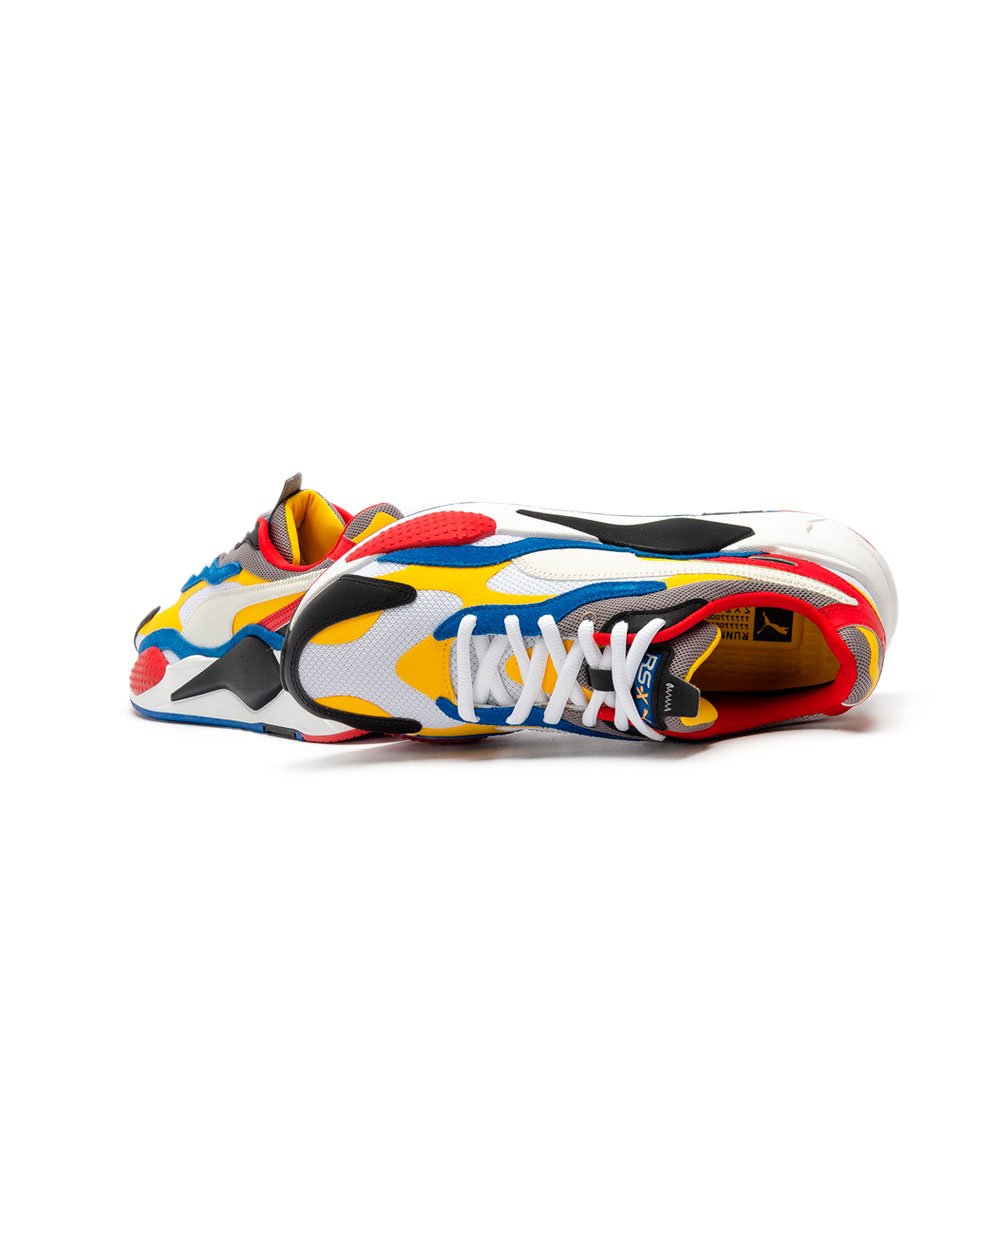 Puma RS X³ Puzzle Yellow